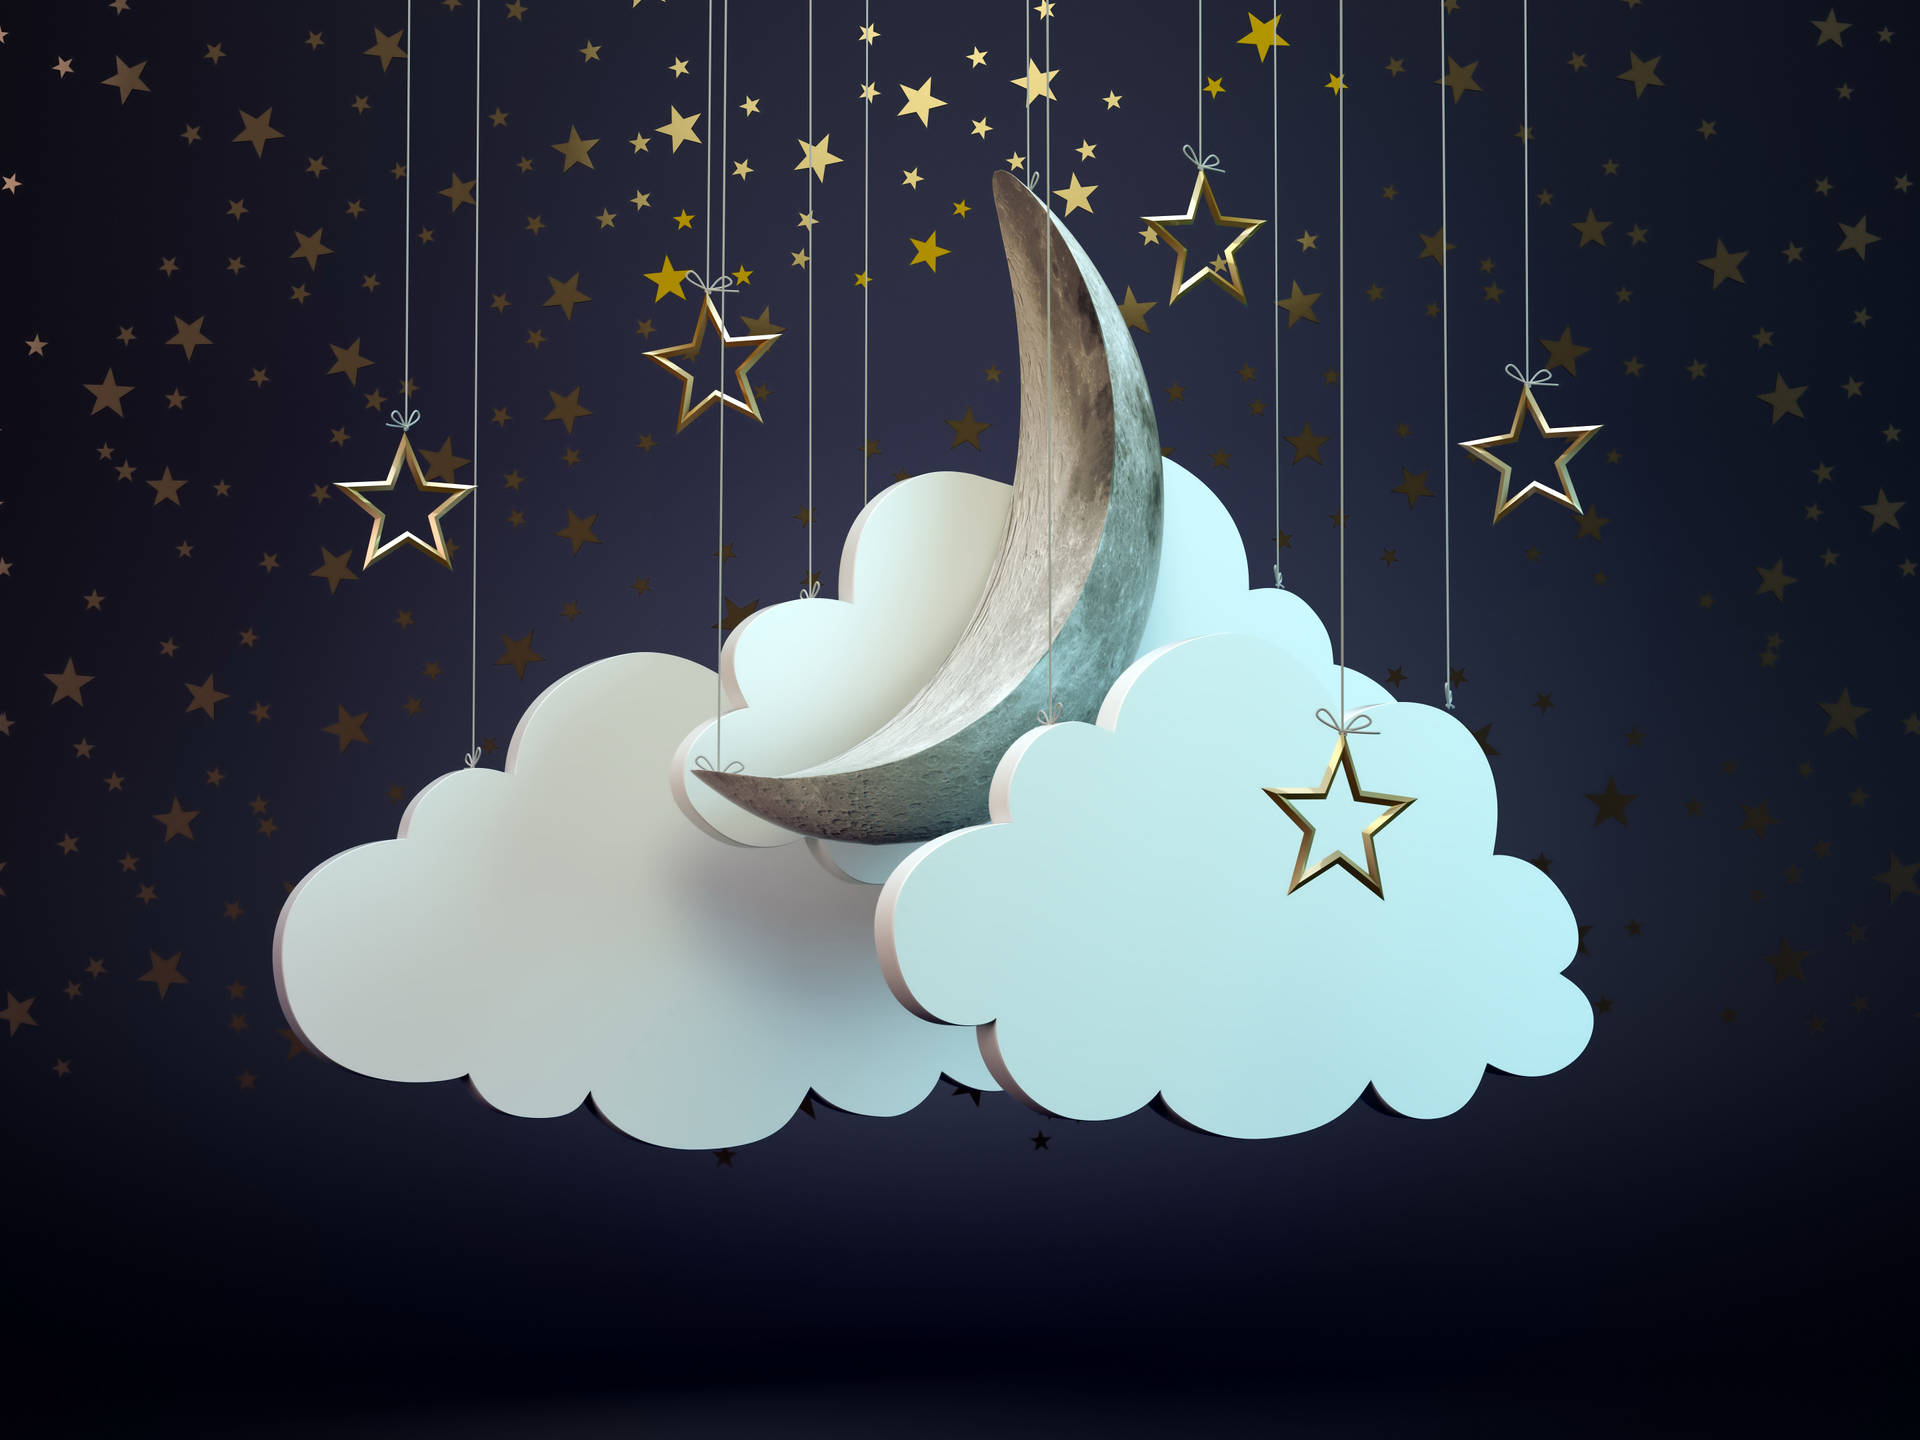 Free Moon And Stars Wallpaper Downloads, [200+] Moon And Stars Wallpapers  for FREE 